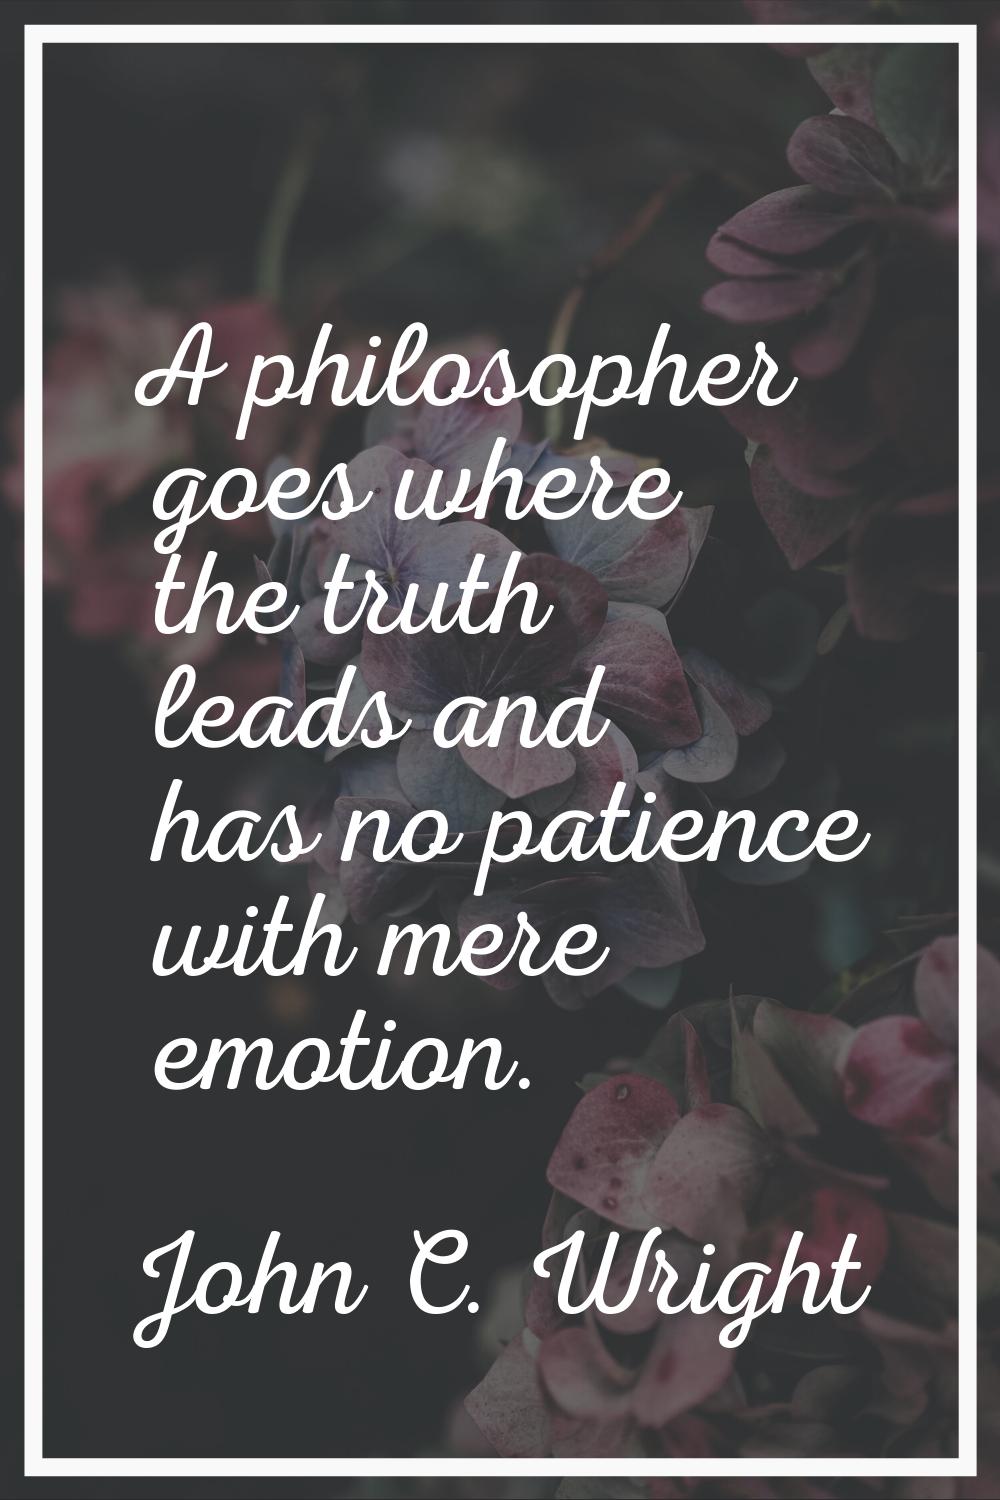 A philosopher goes where the truth leads and has no patience with mere emotion.